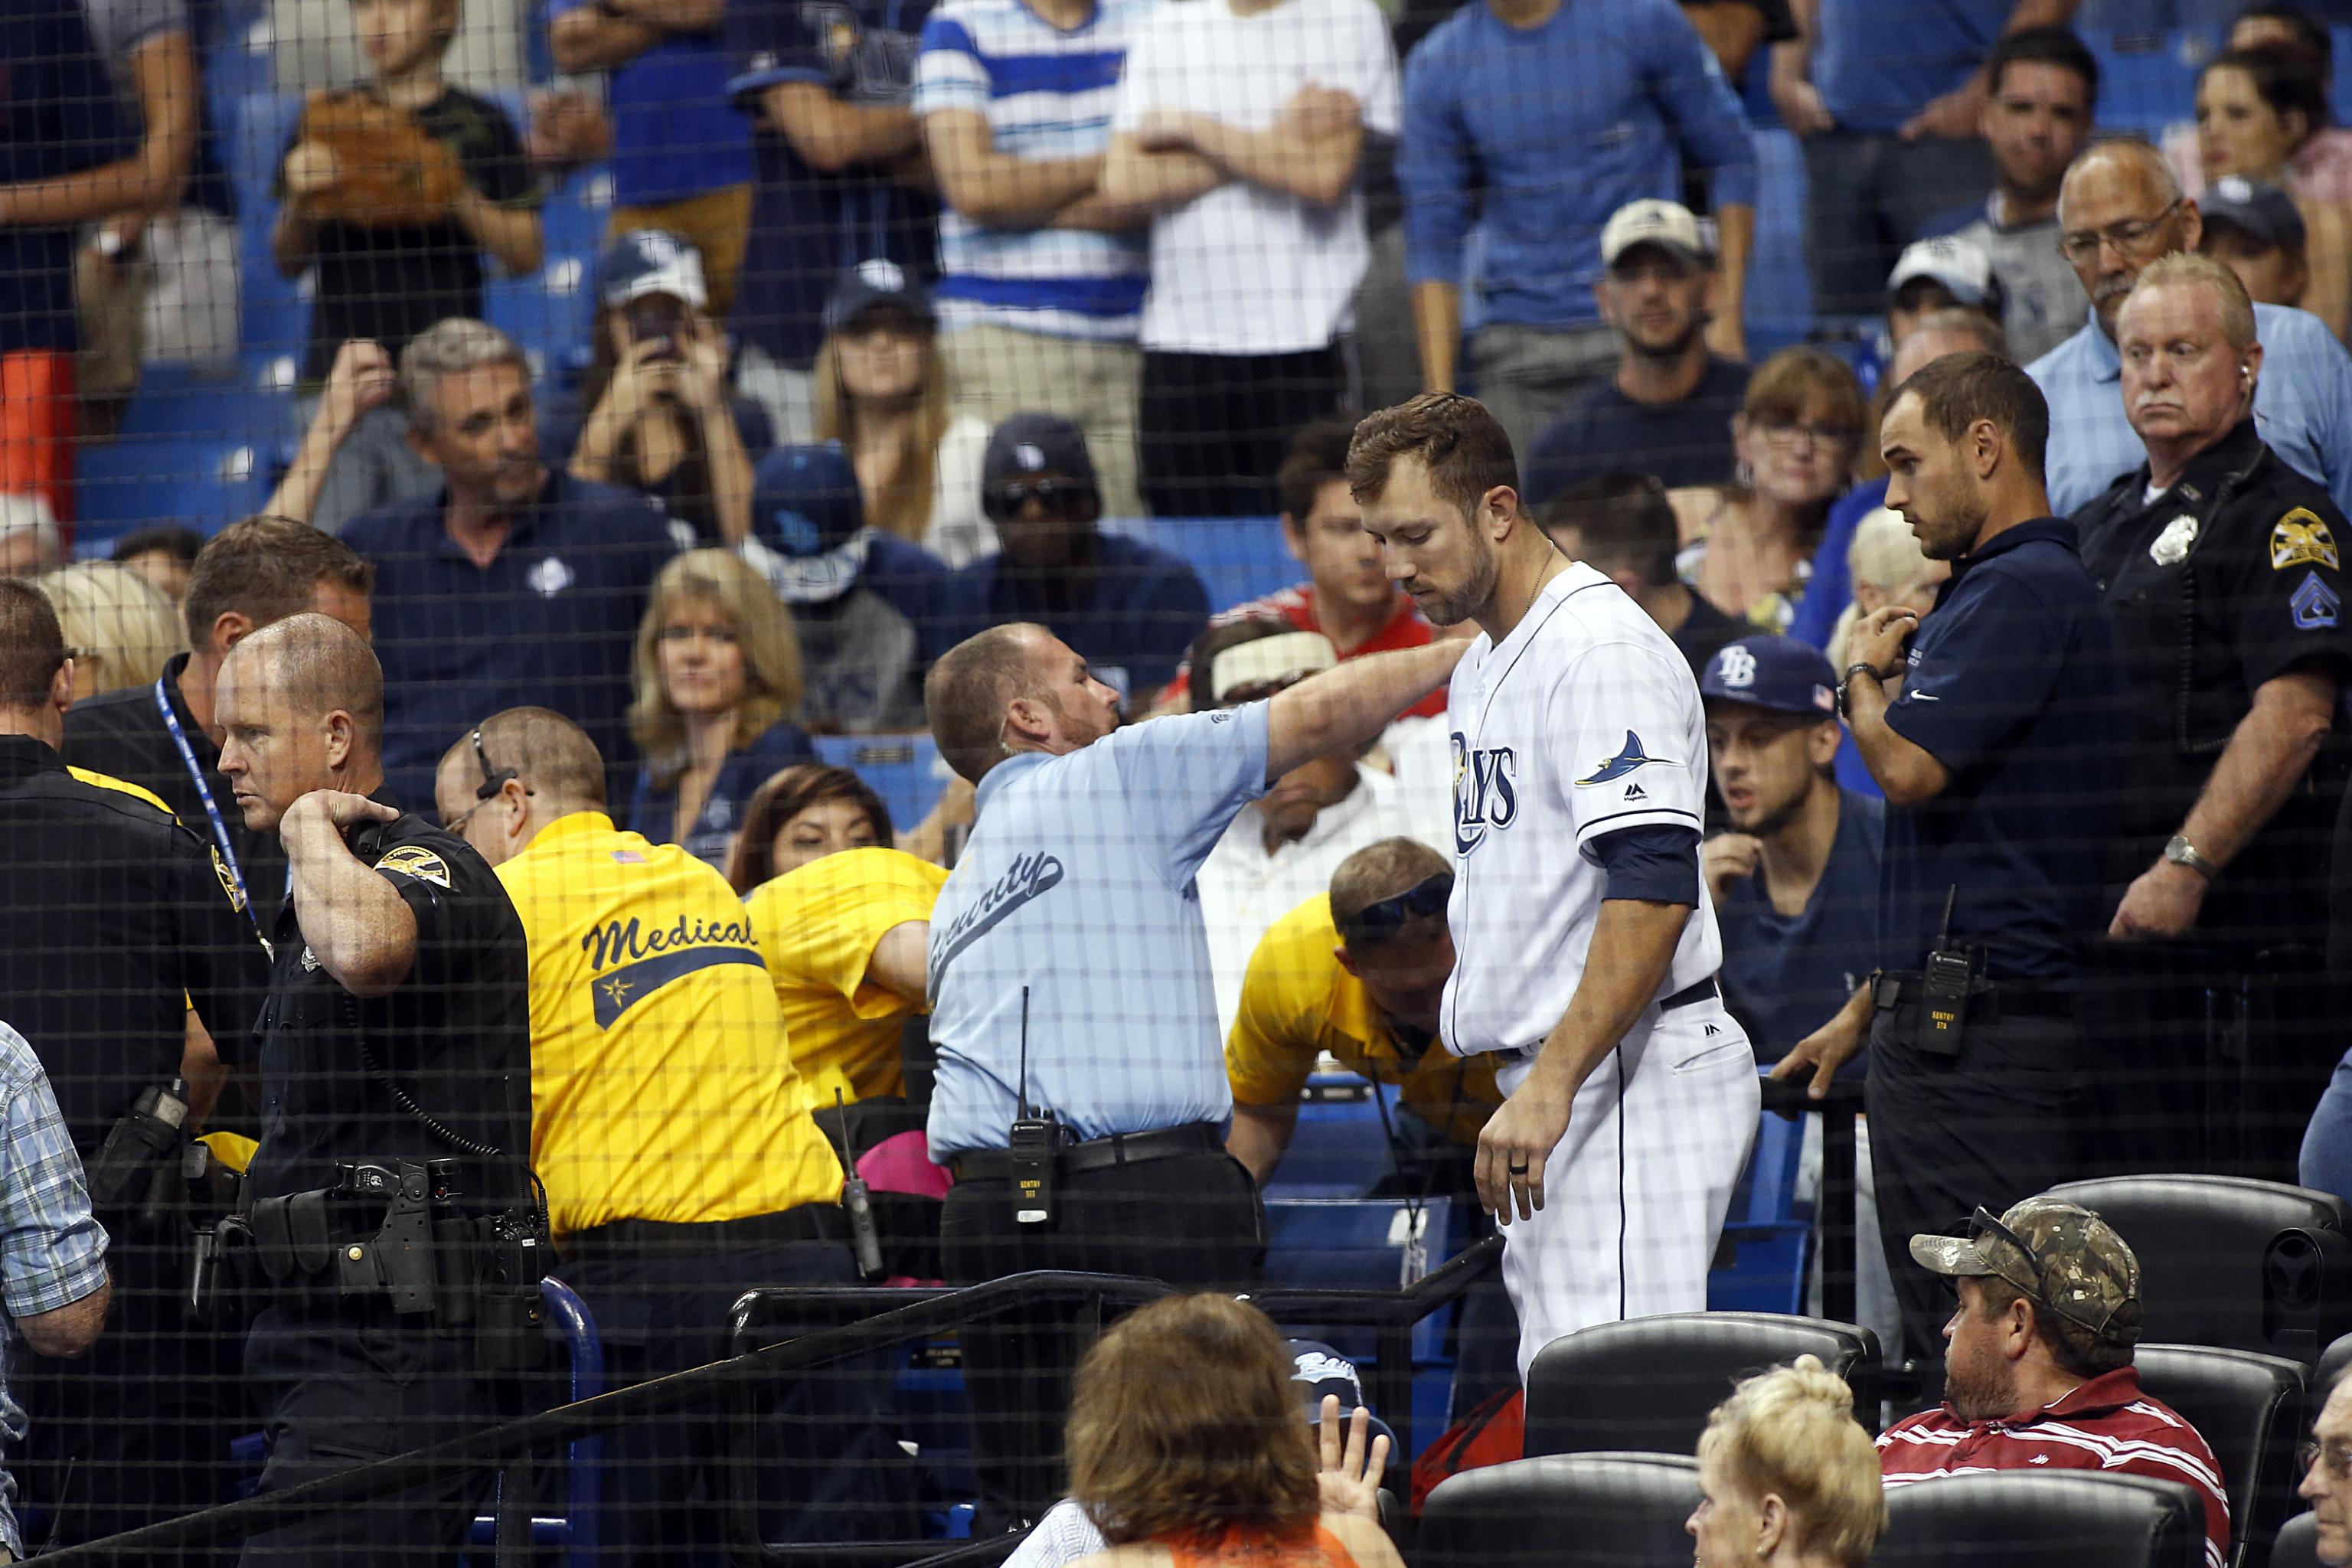 Rays attempt to slap their fans in the face, but can't find any